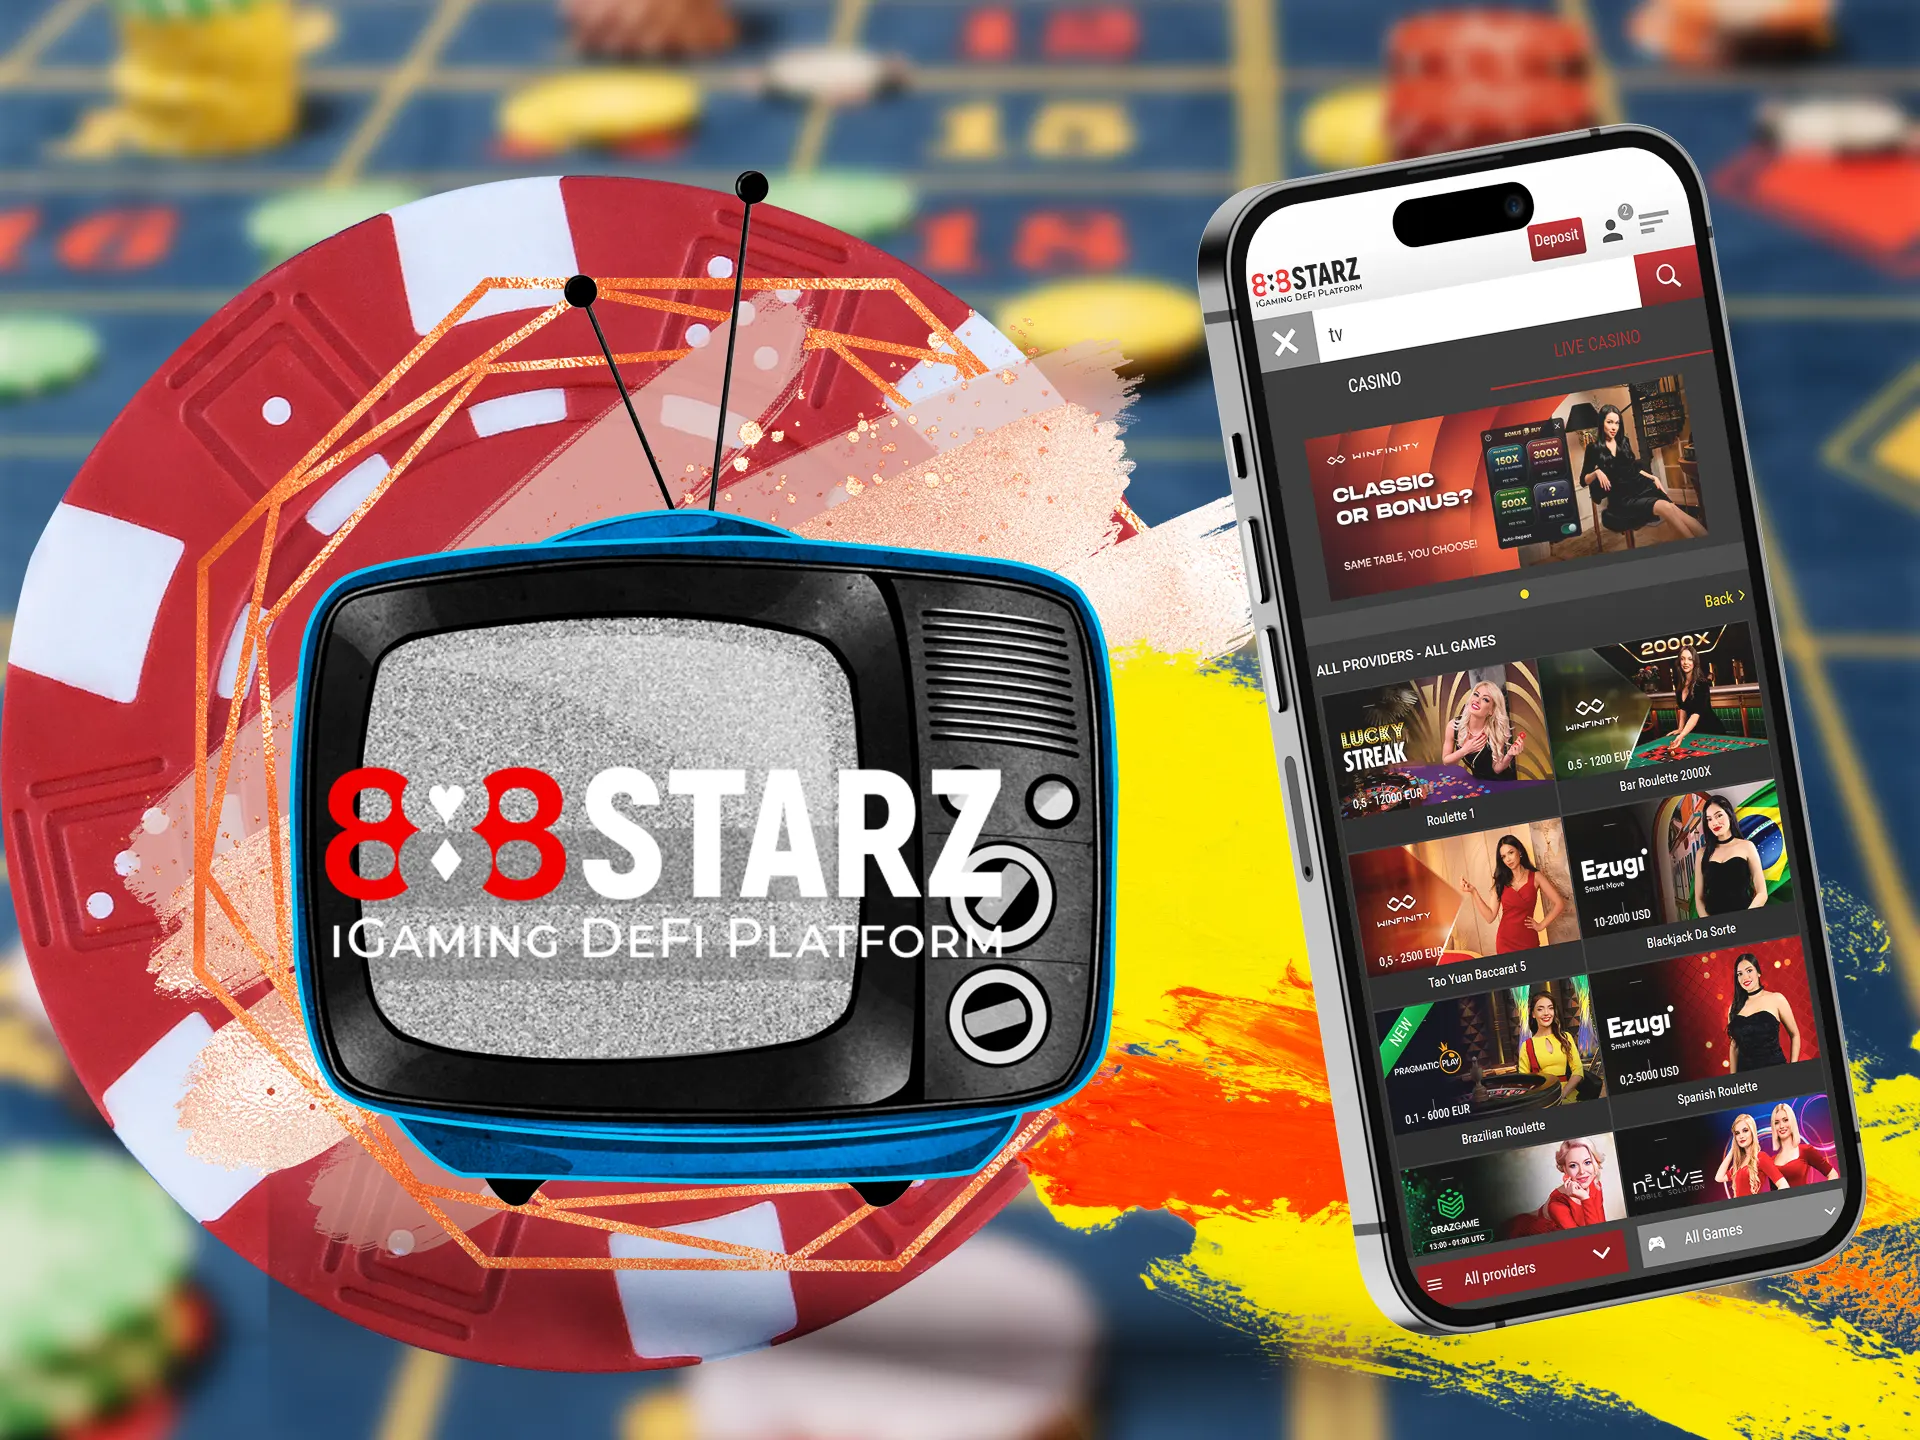 This game is reminiscent of a TV show that used to air on TV, you will be immersed in the times at 888starz.